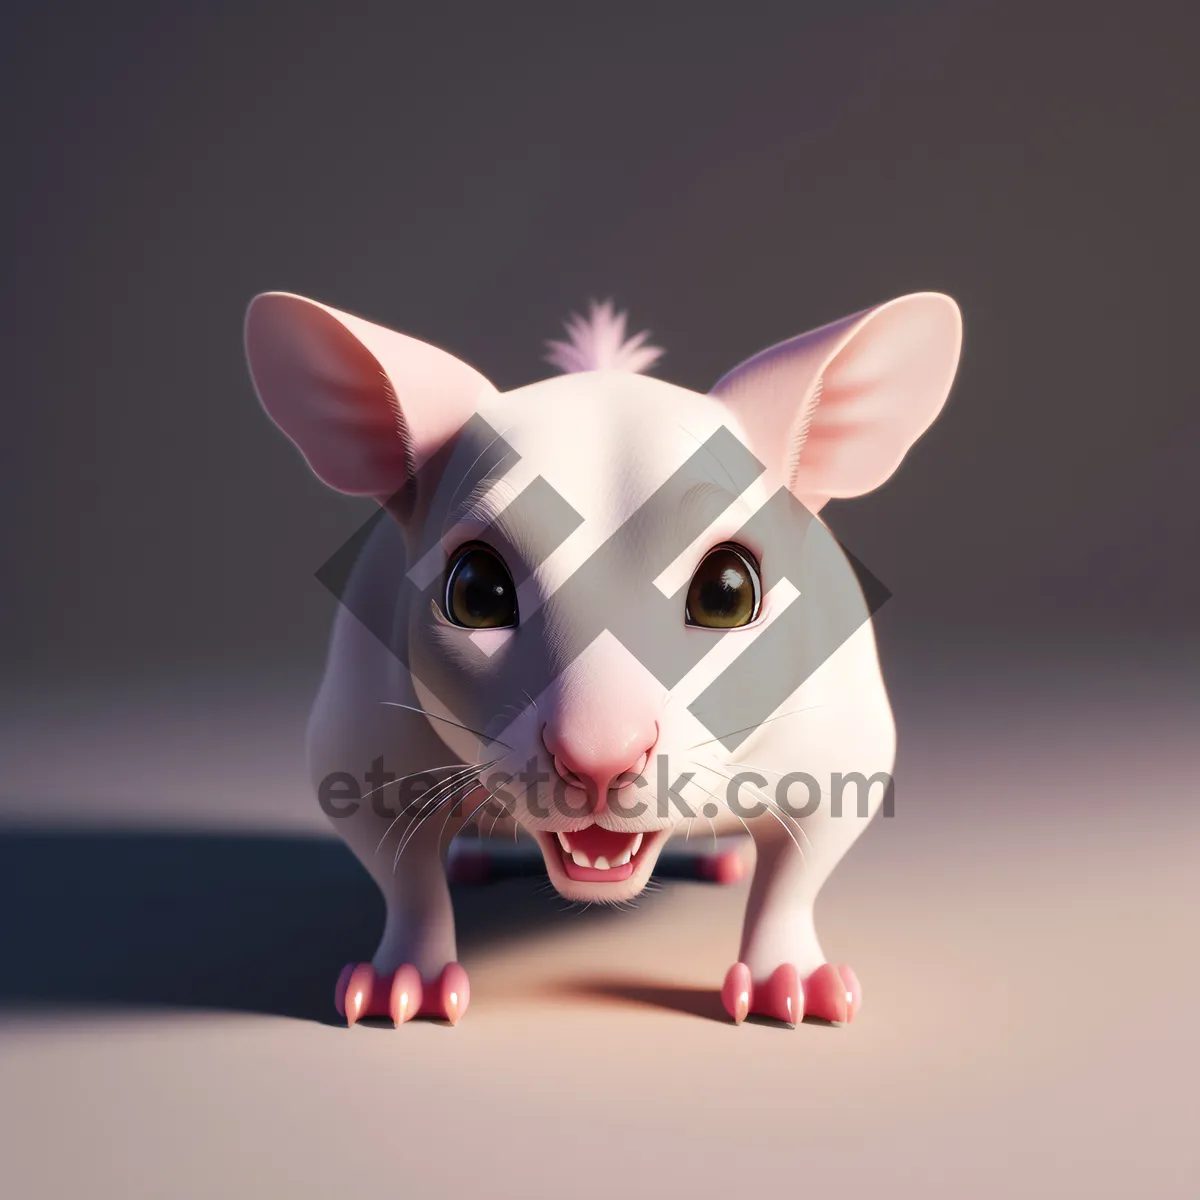 Picture of Piggy Bank Savings - Pink Pig with Money